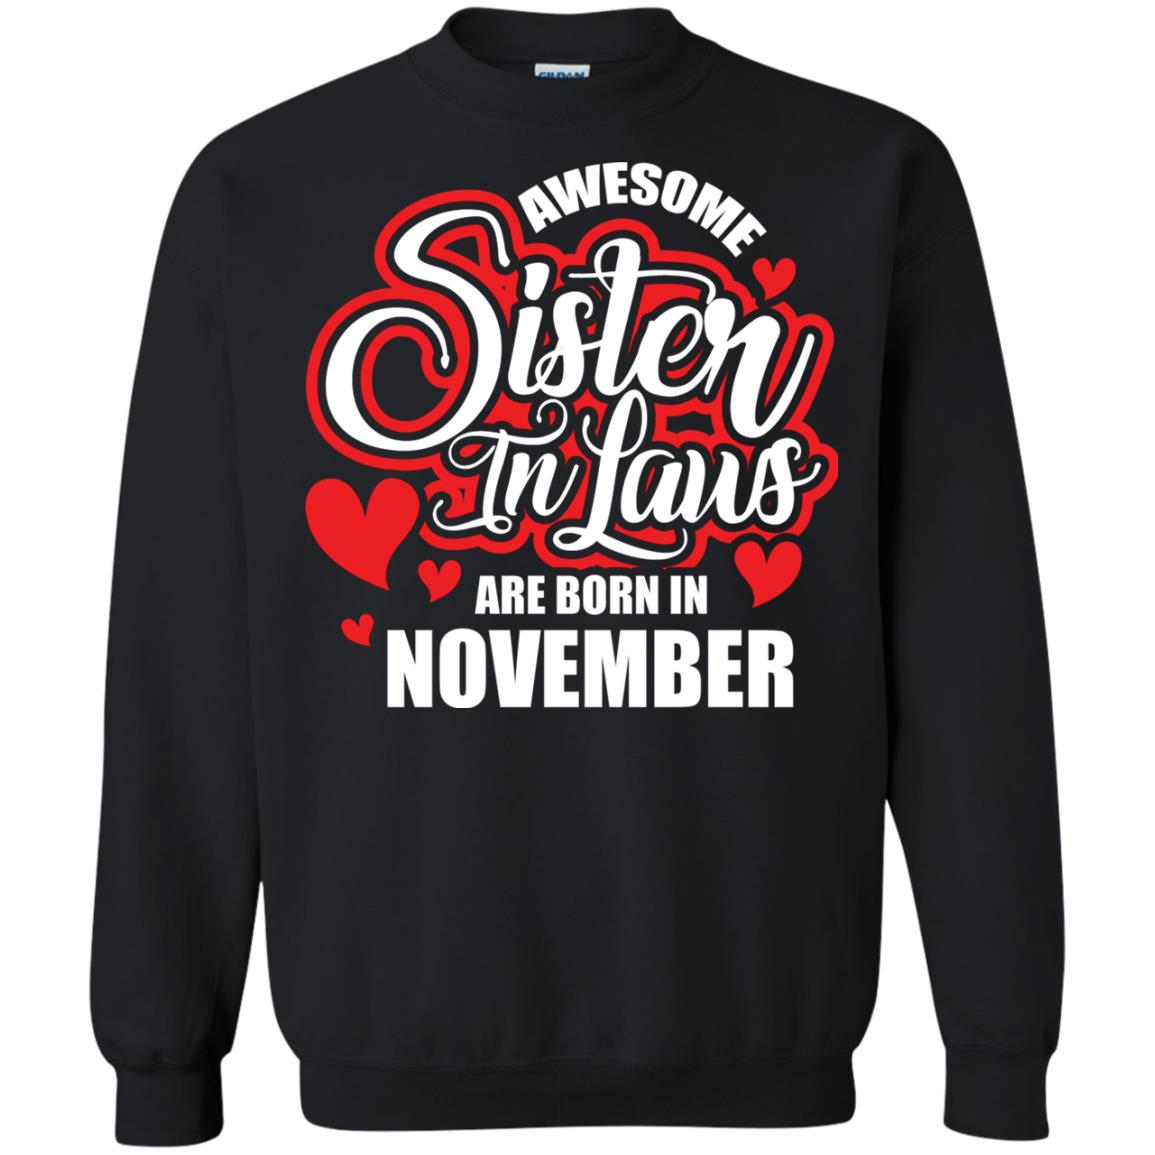 November T-shirt Awesome Sister In Laws Are Born In November